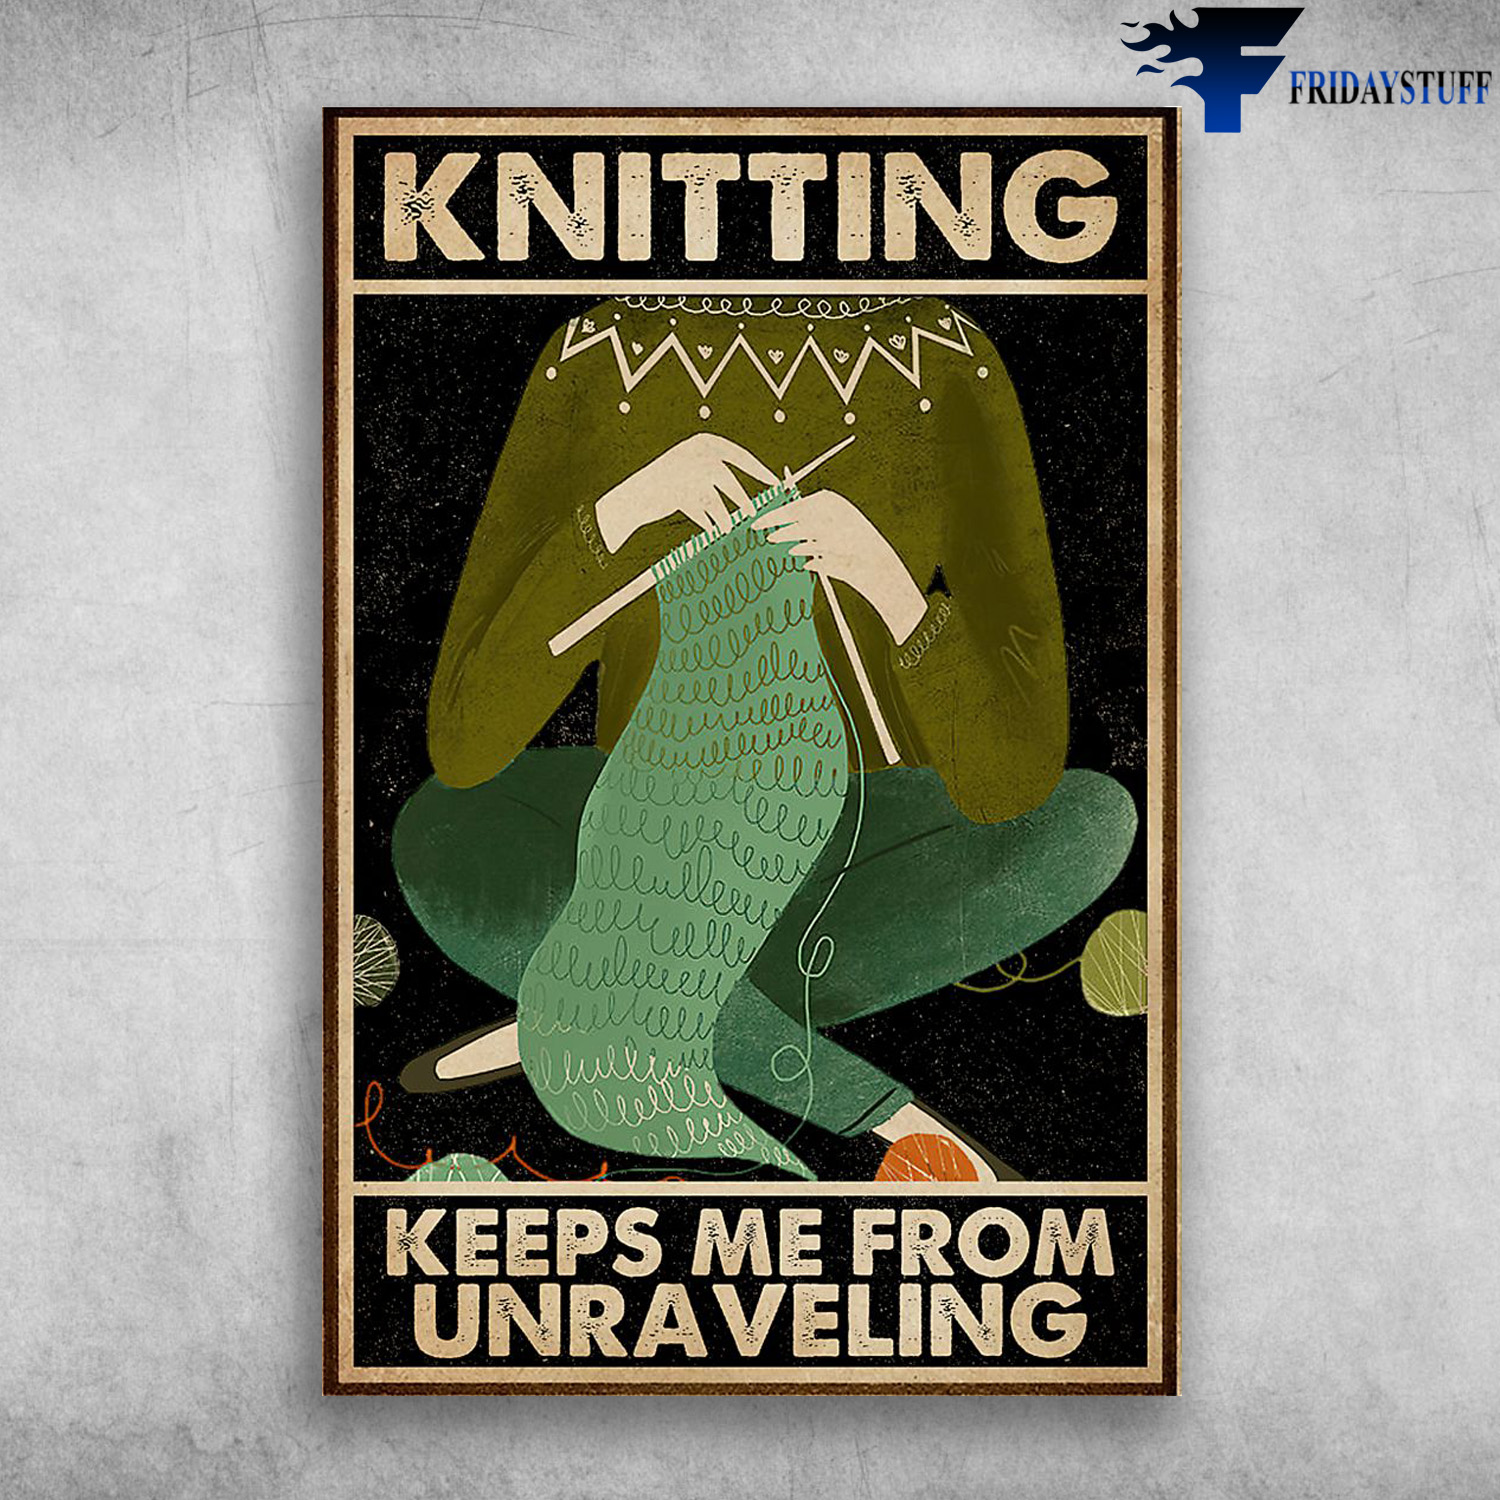 A Person Is Knitting - Knitting Keeps Me From Unraveling